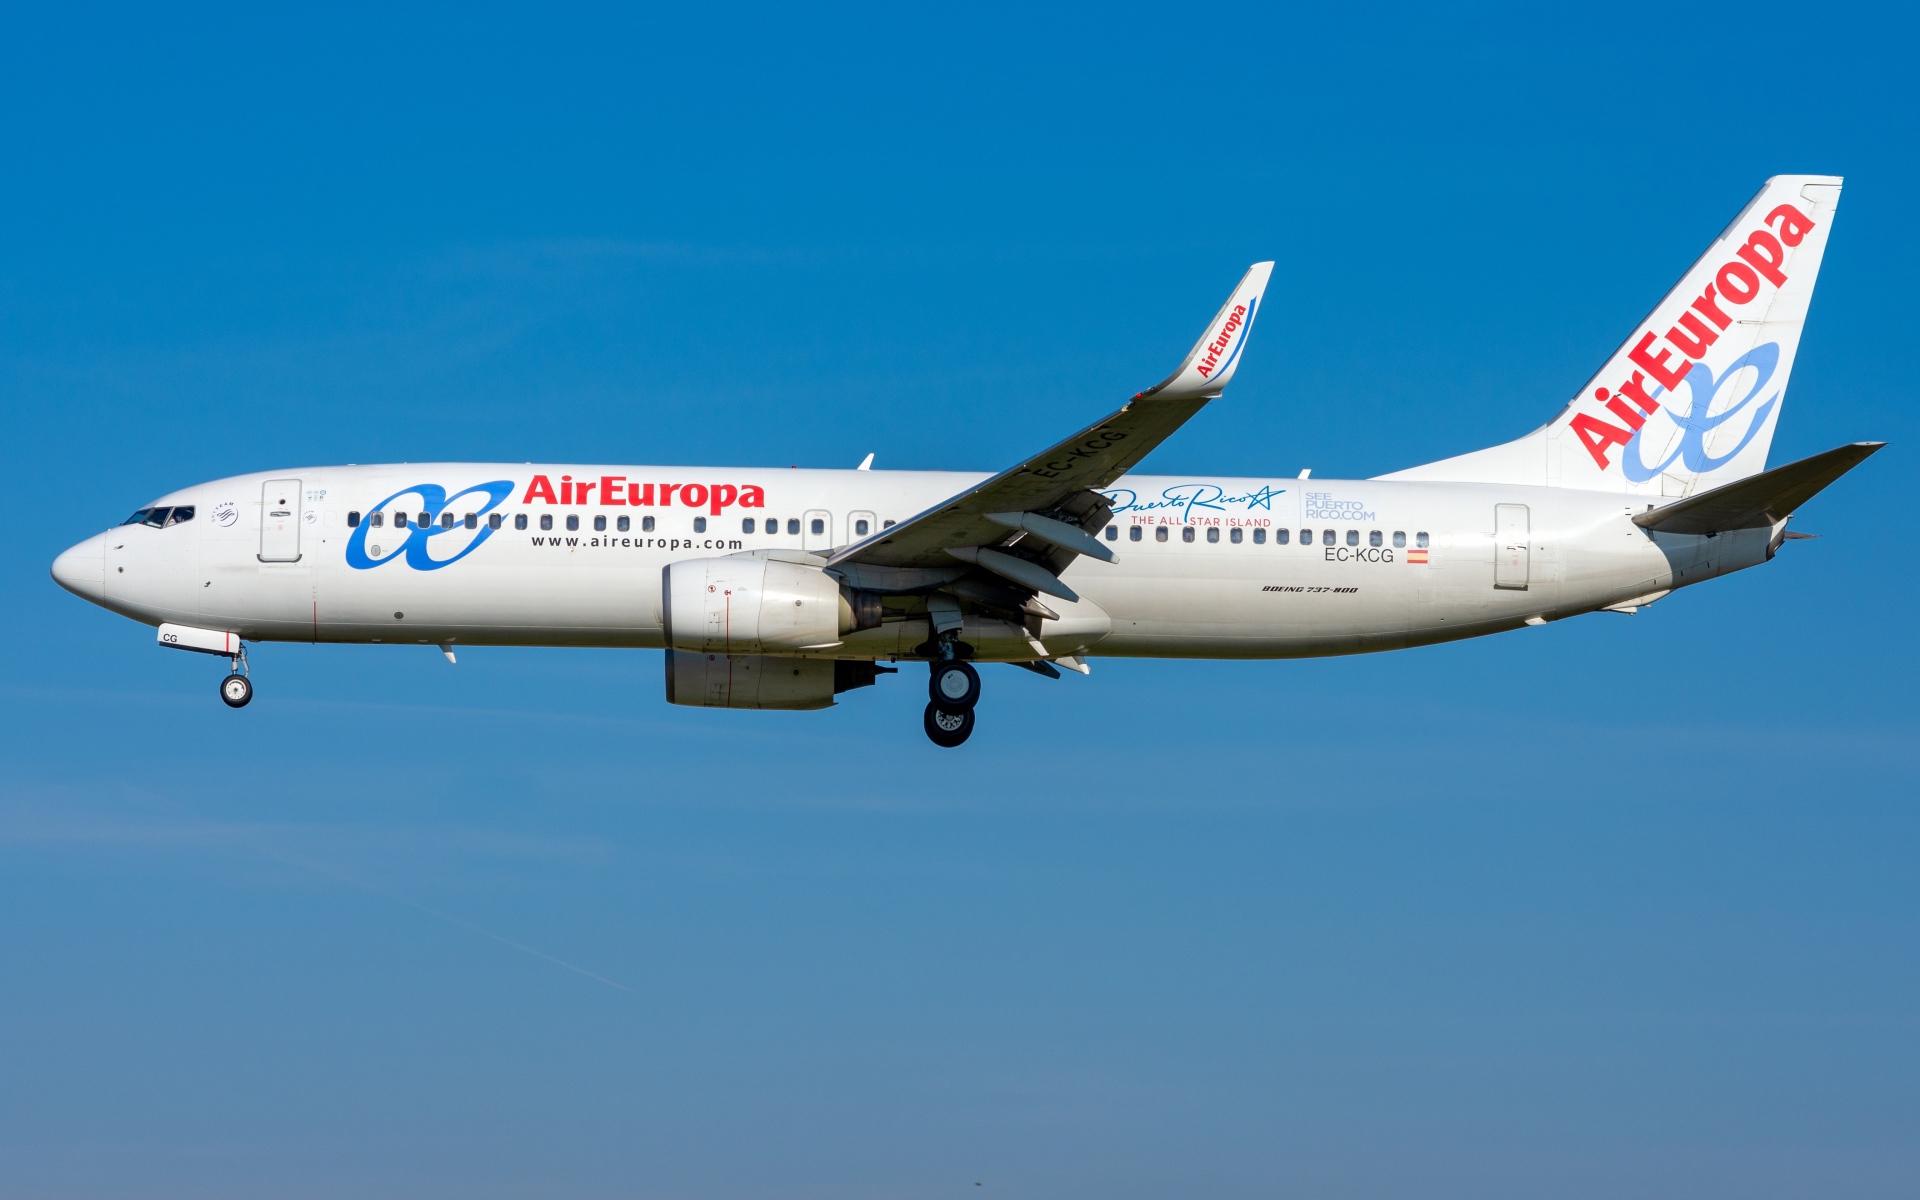 Large passenger Boeing 737-800W airline Air Europa in the blue sky